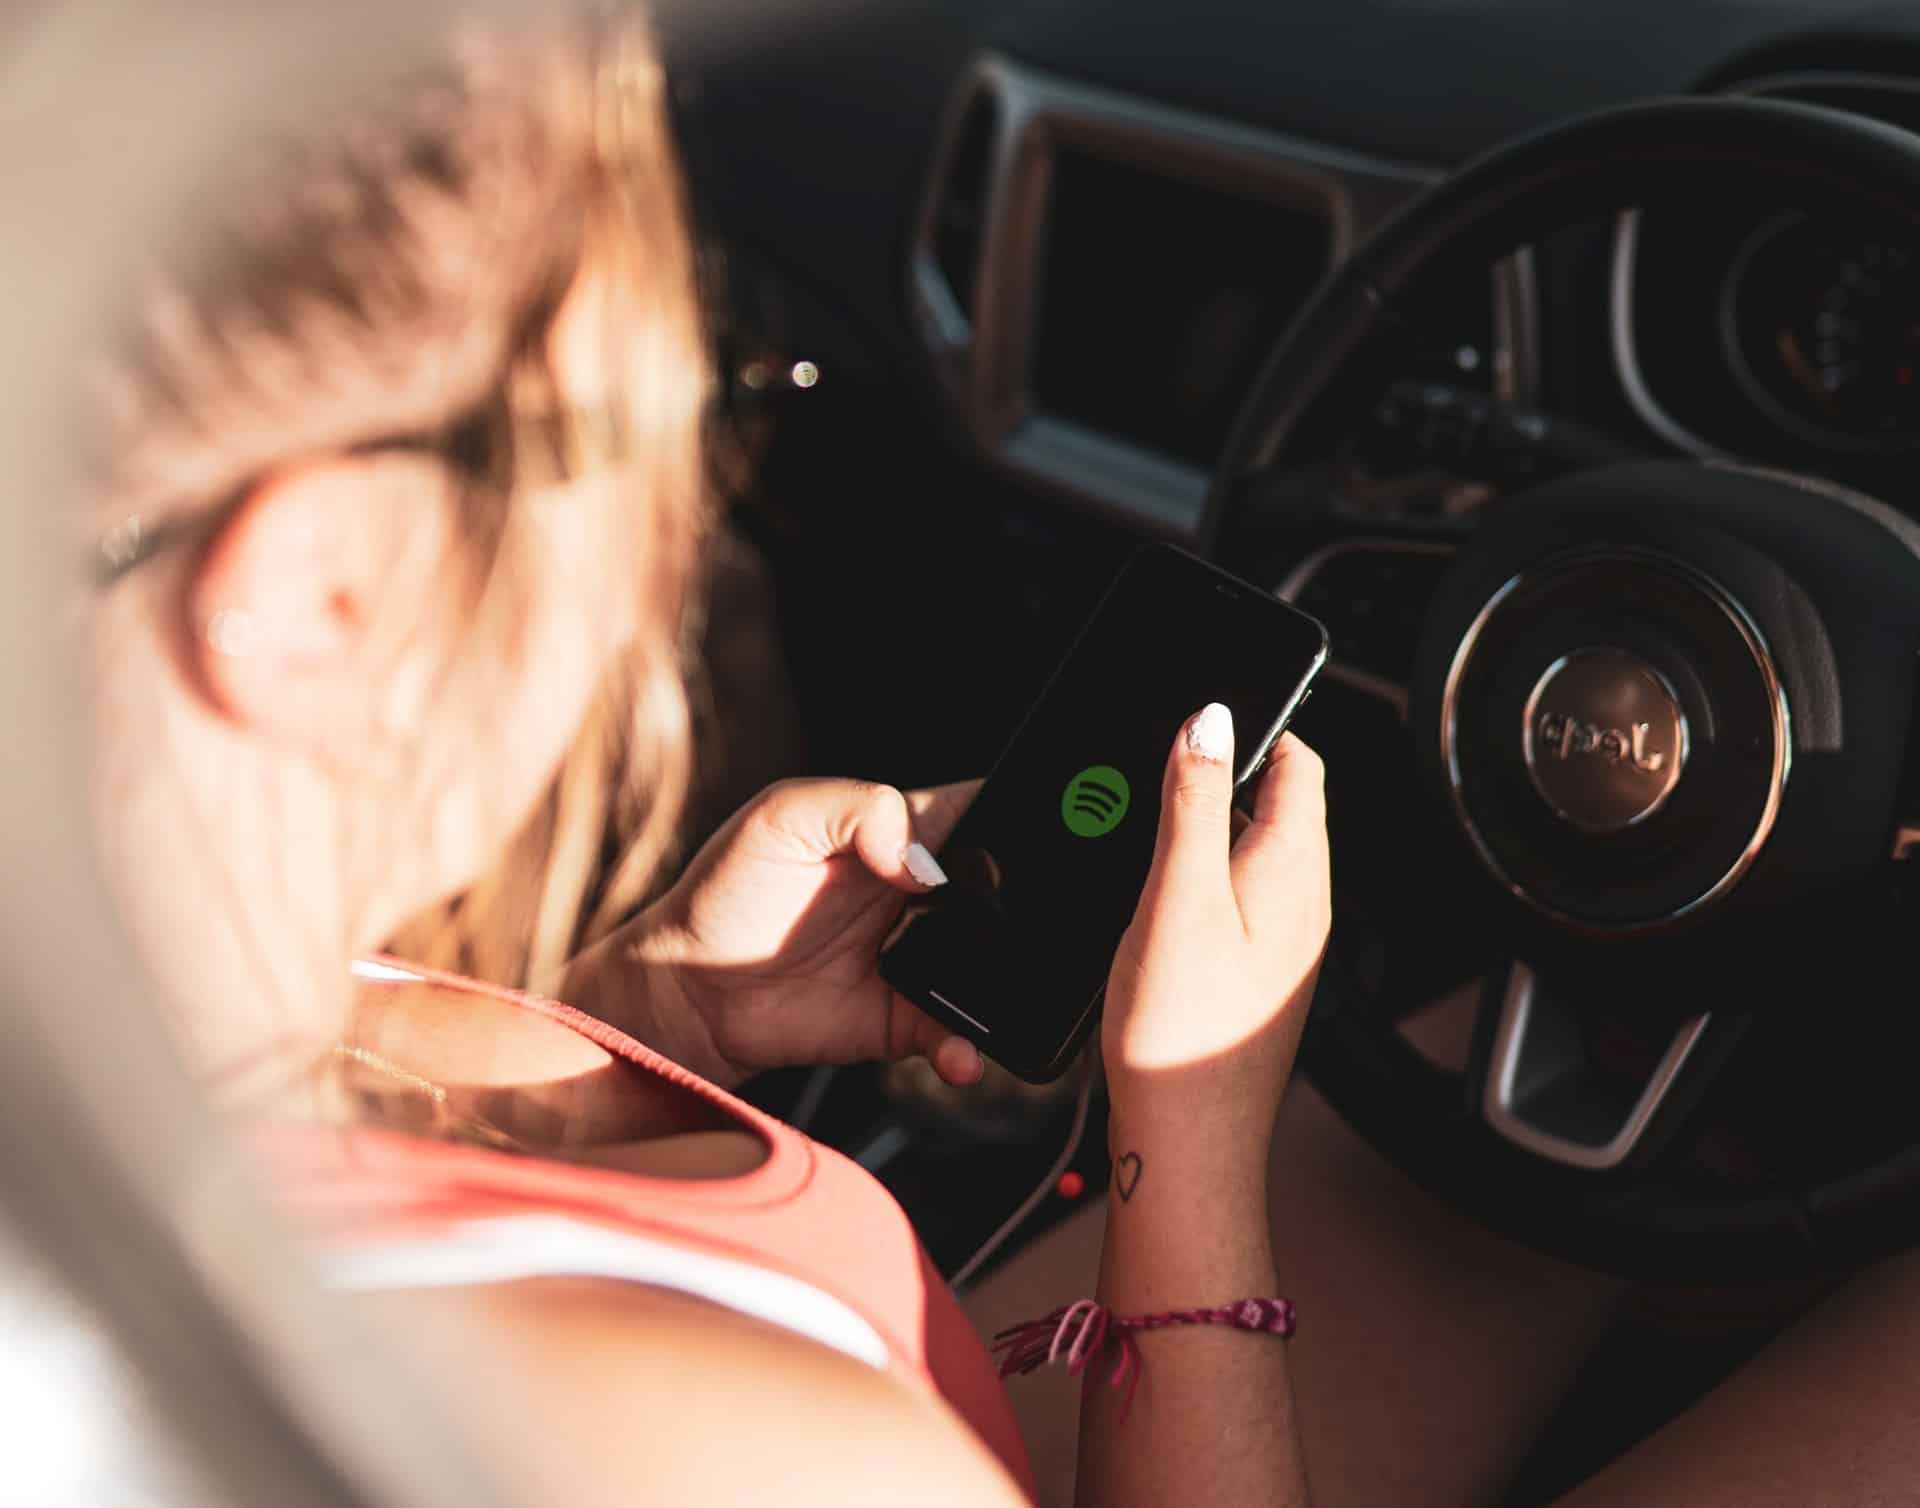 woman opens spotify behind the wheel and is guilty of distracted driving